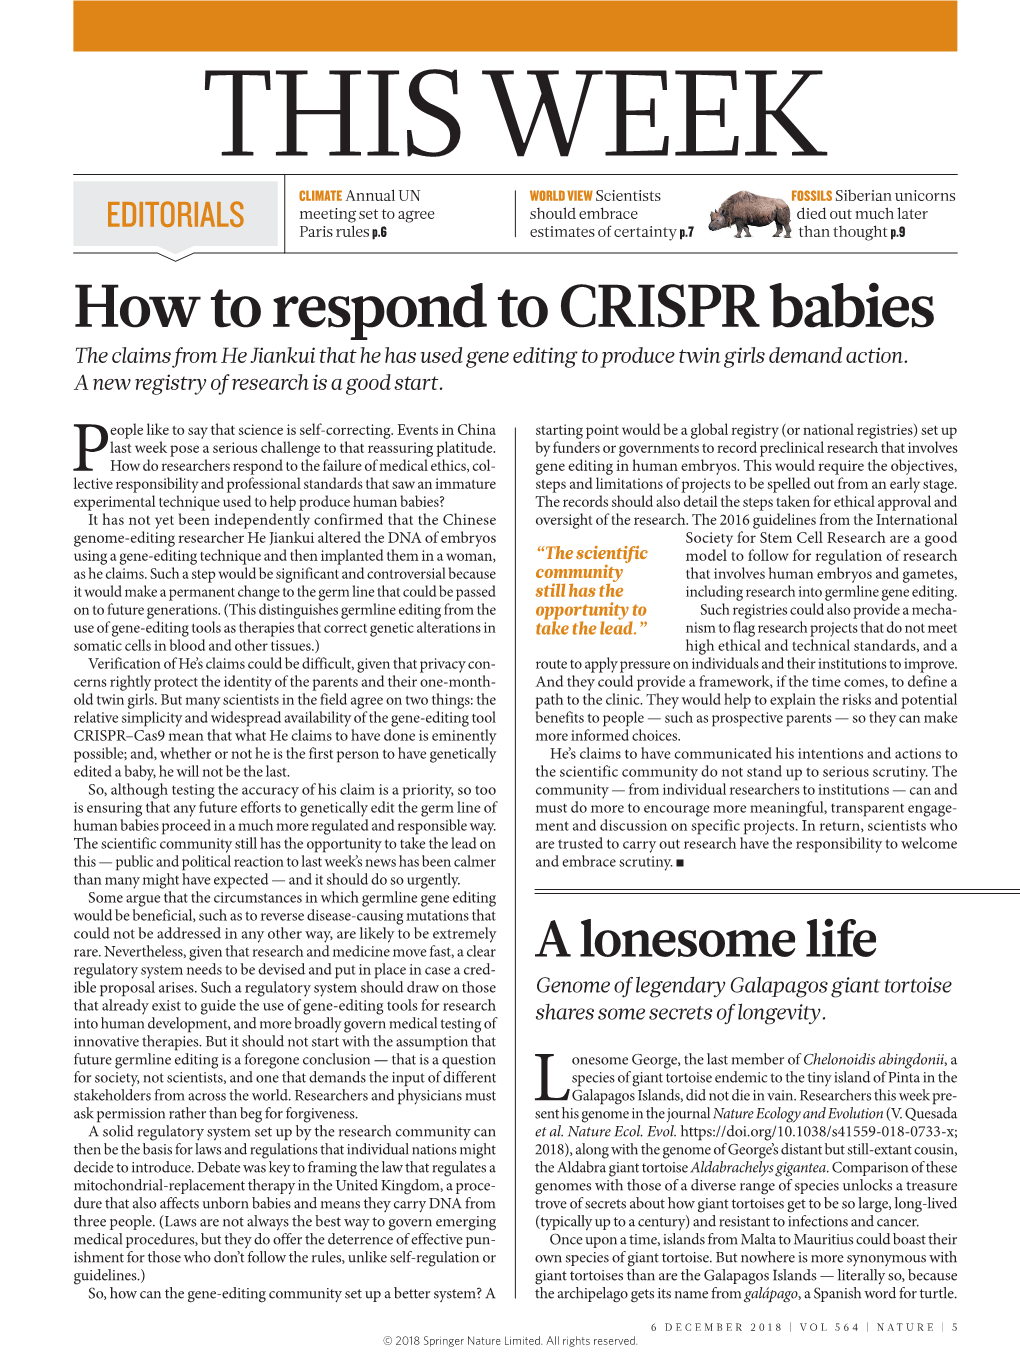 How to Respond to CRISPR Babies the Claims from He Jiankui That He Has Used Gene Editing to Produce Twin Girls Demand Action